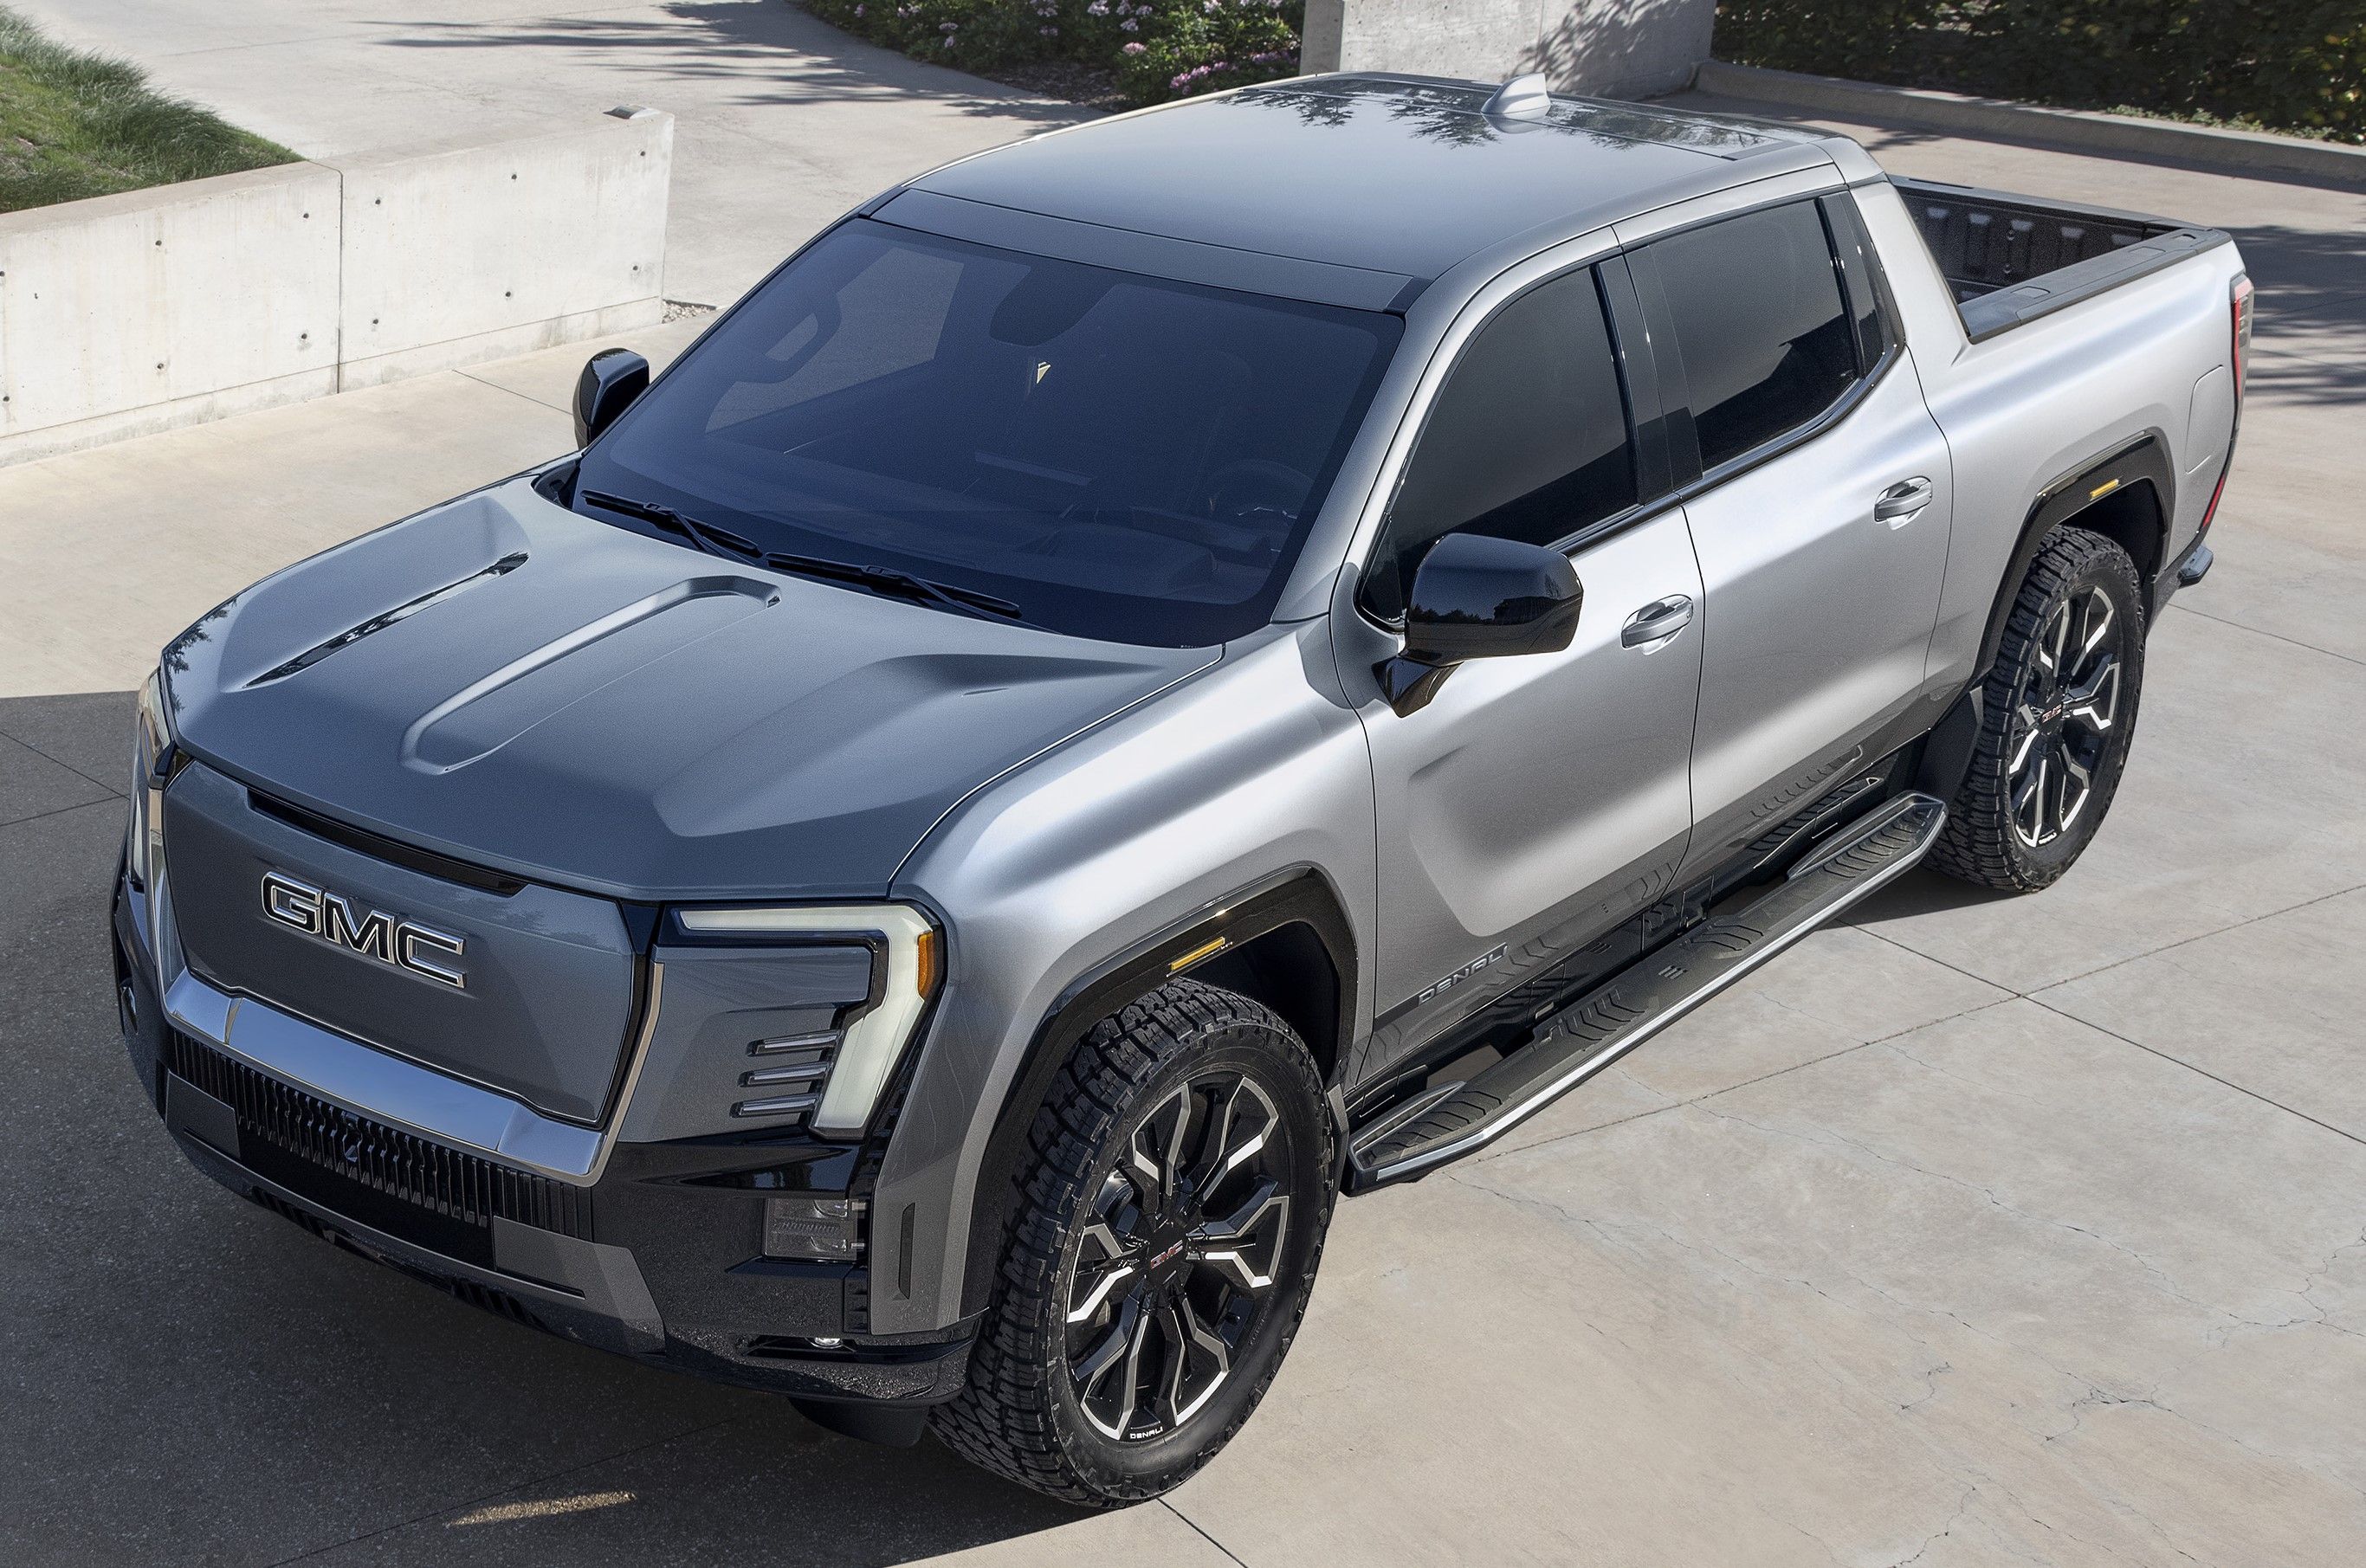 10 Fast Facts About The 2024 GMC Sierra EV Pickup Truck